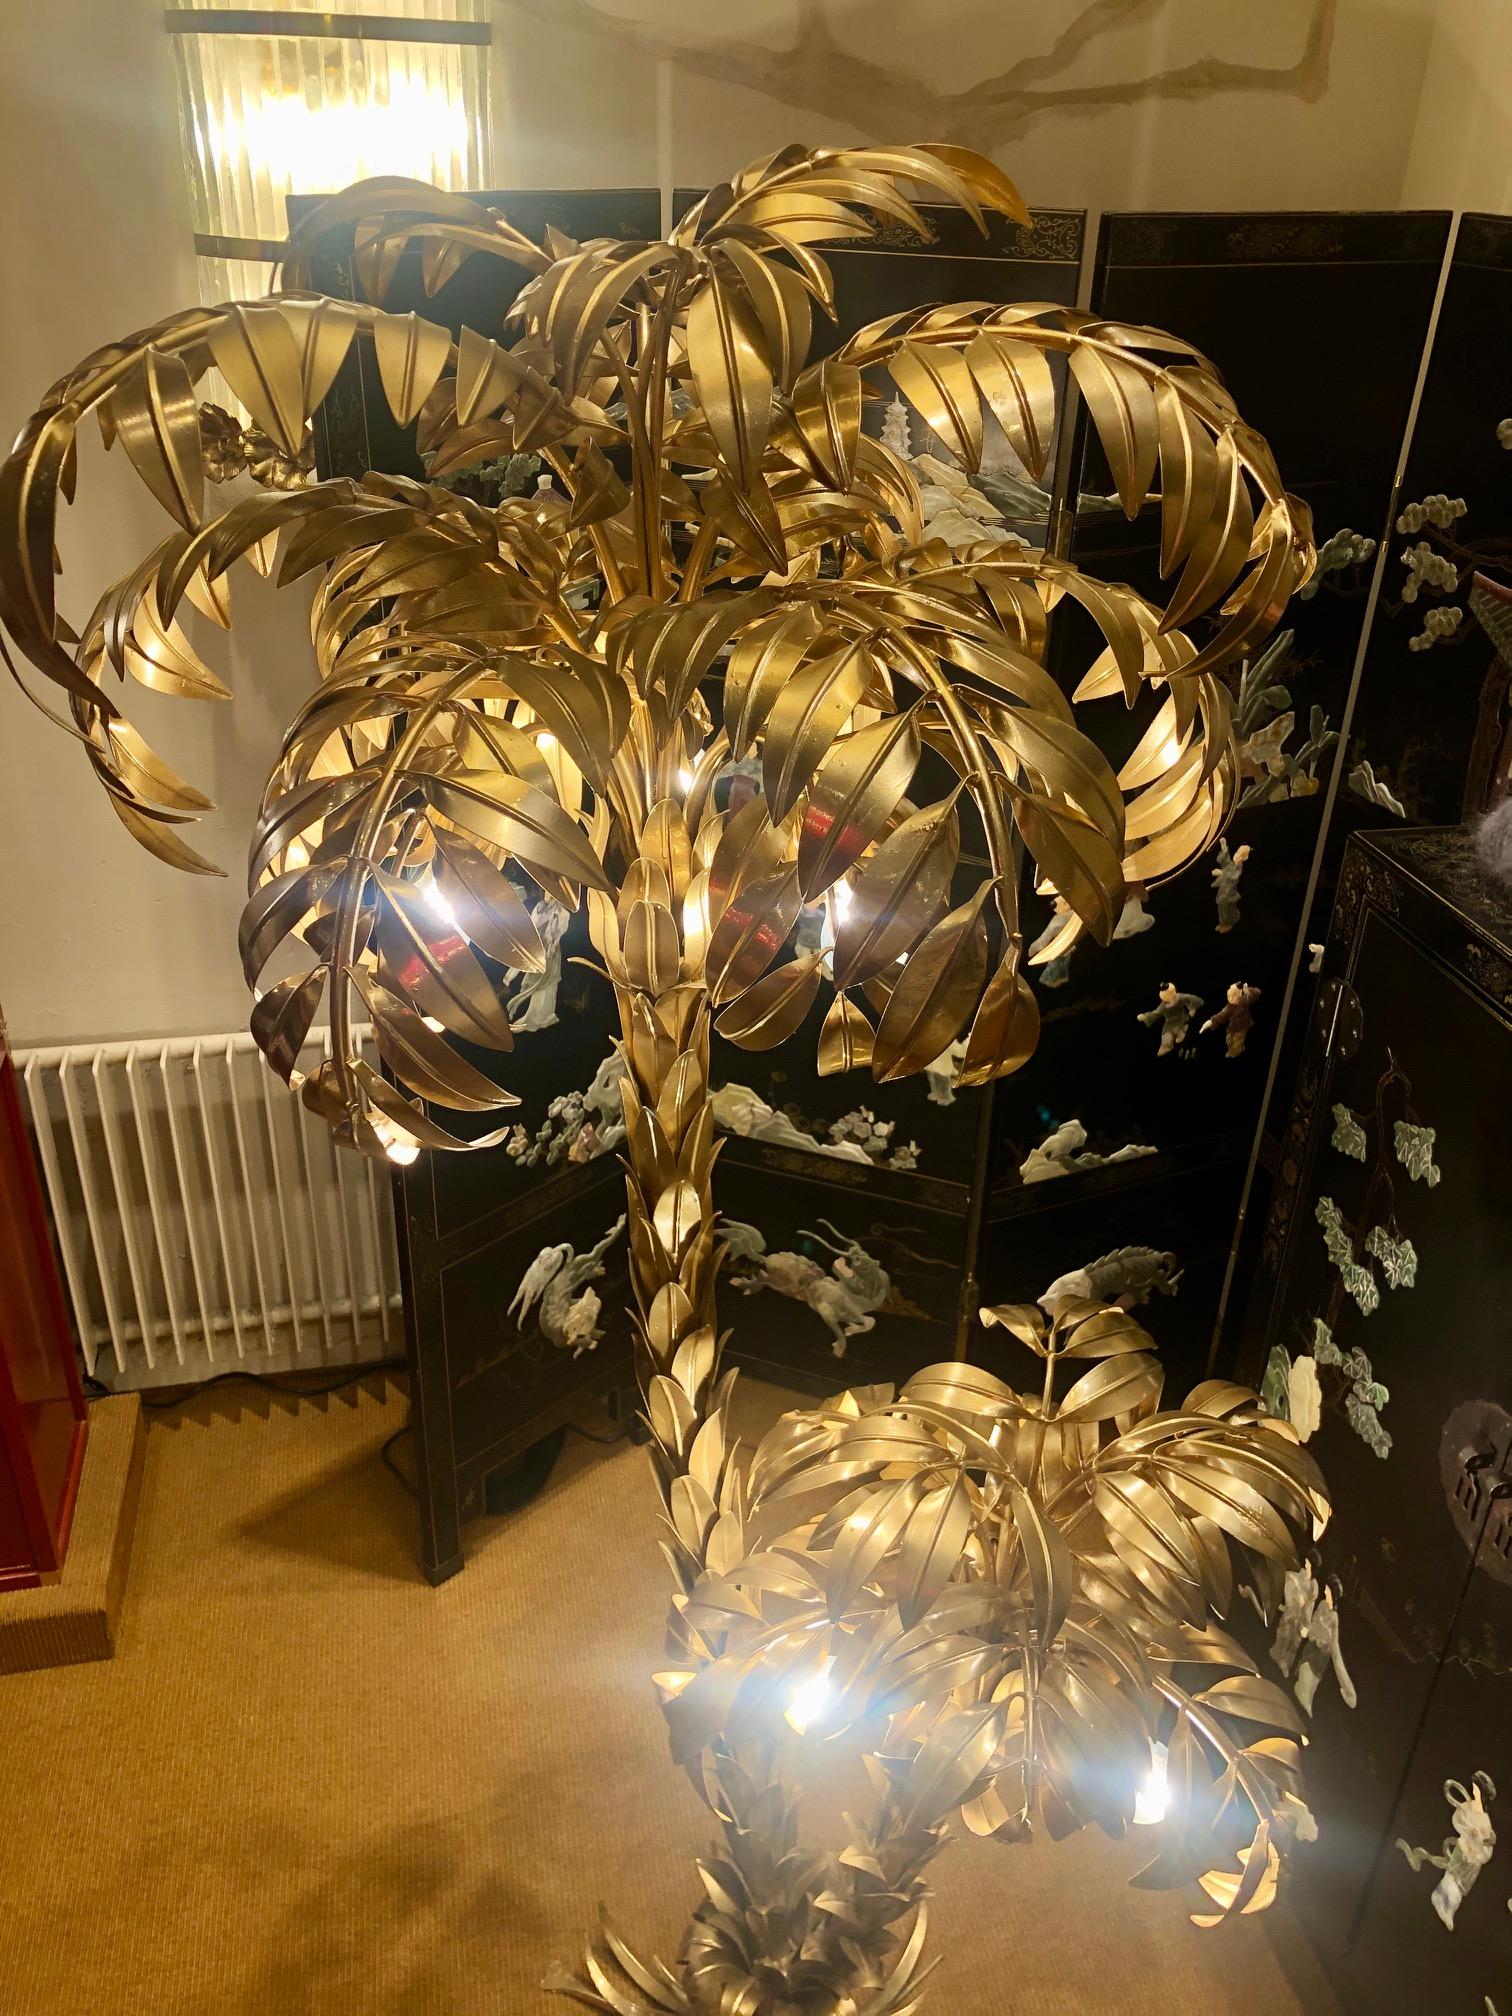 Original two trunk palm tree floor lamp from the 1970s of the German designer Hans Kögl.
The lamp is made of gold-plated metal and cast significant light shadows
Made in Germany around the 1970s, has some light scratches due to age.
Measures 80 x